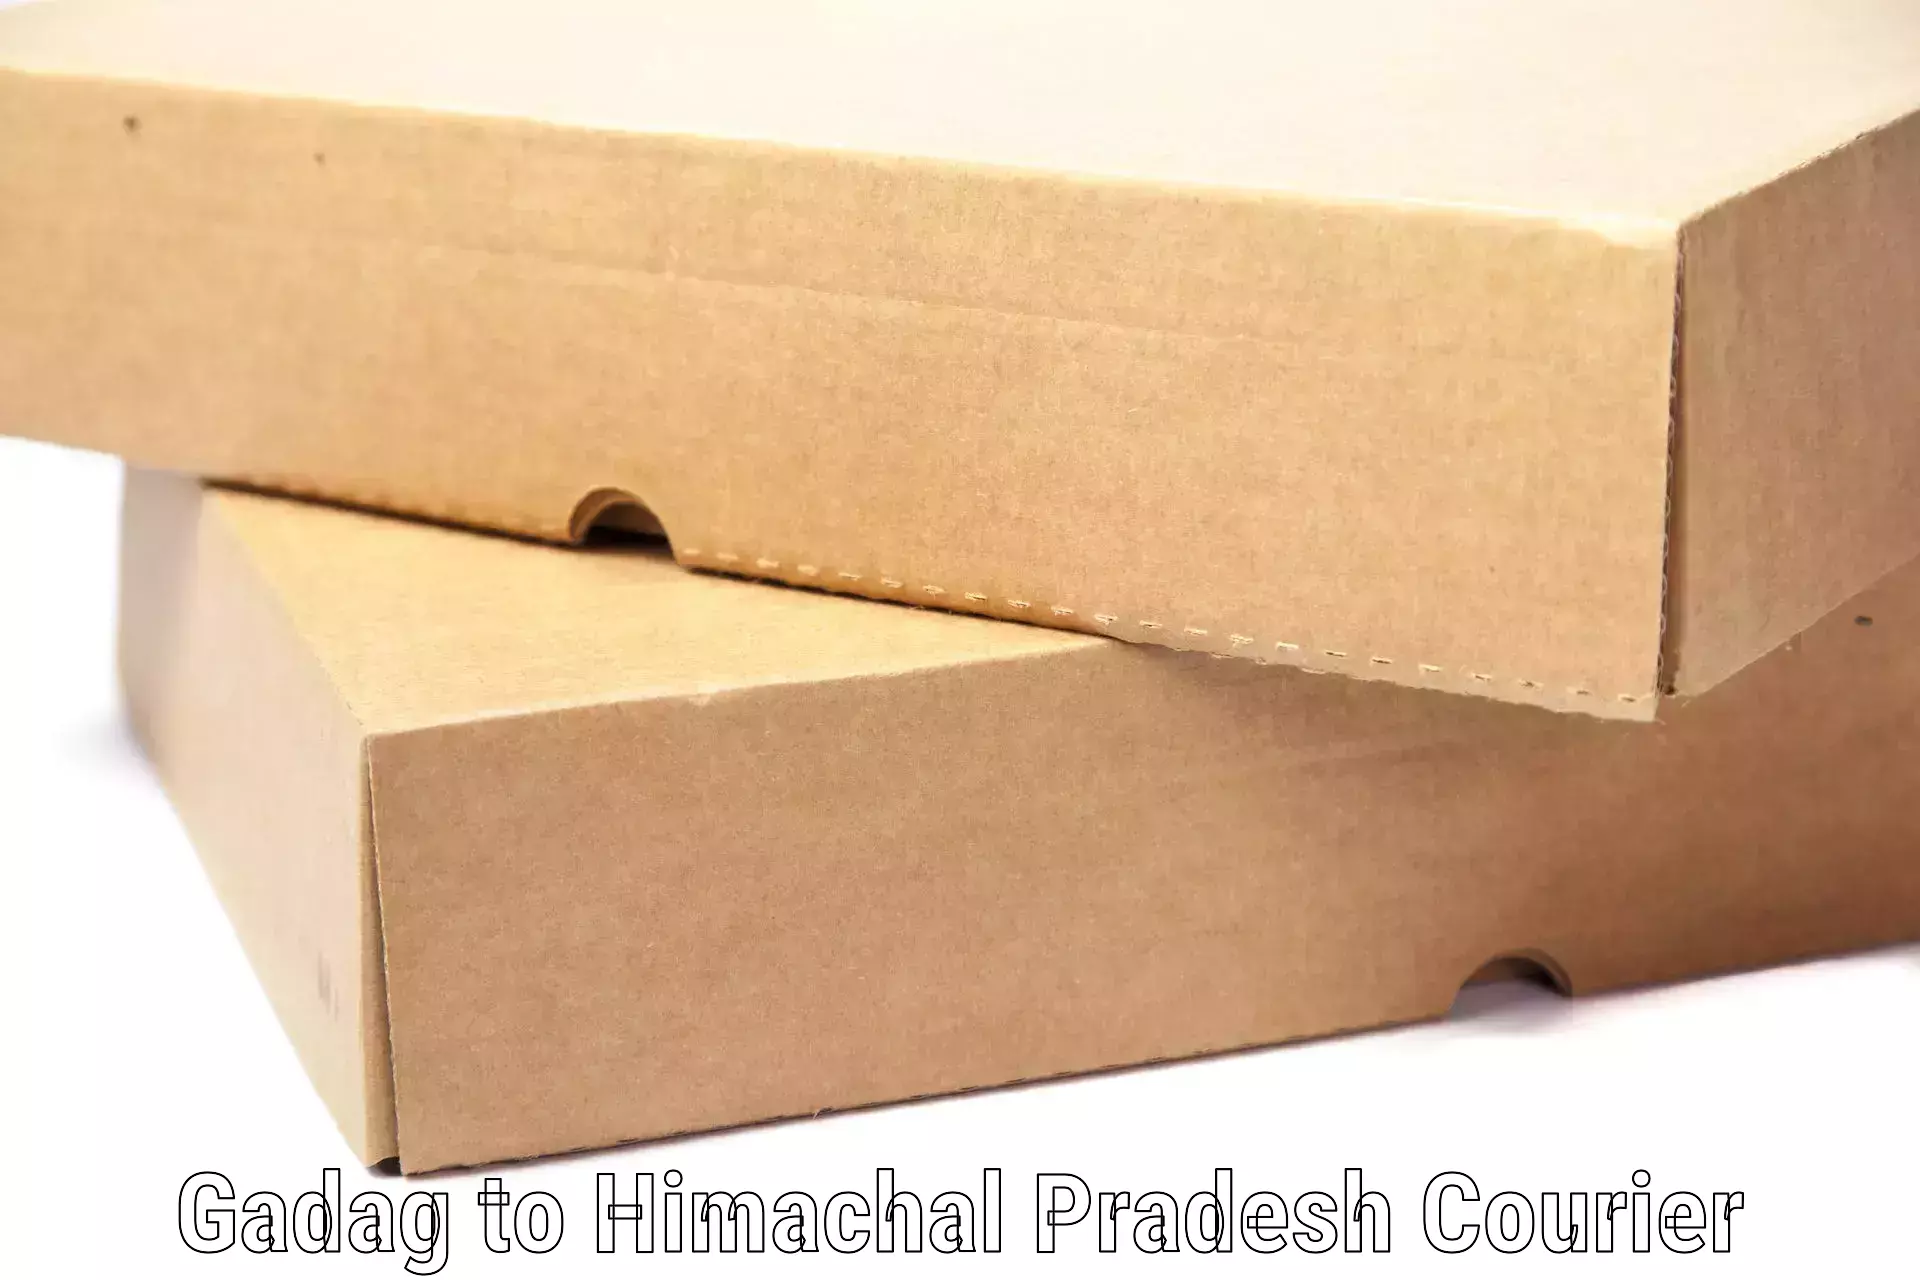 Personal effects shipping Gadag to Himachal Pradesh